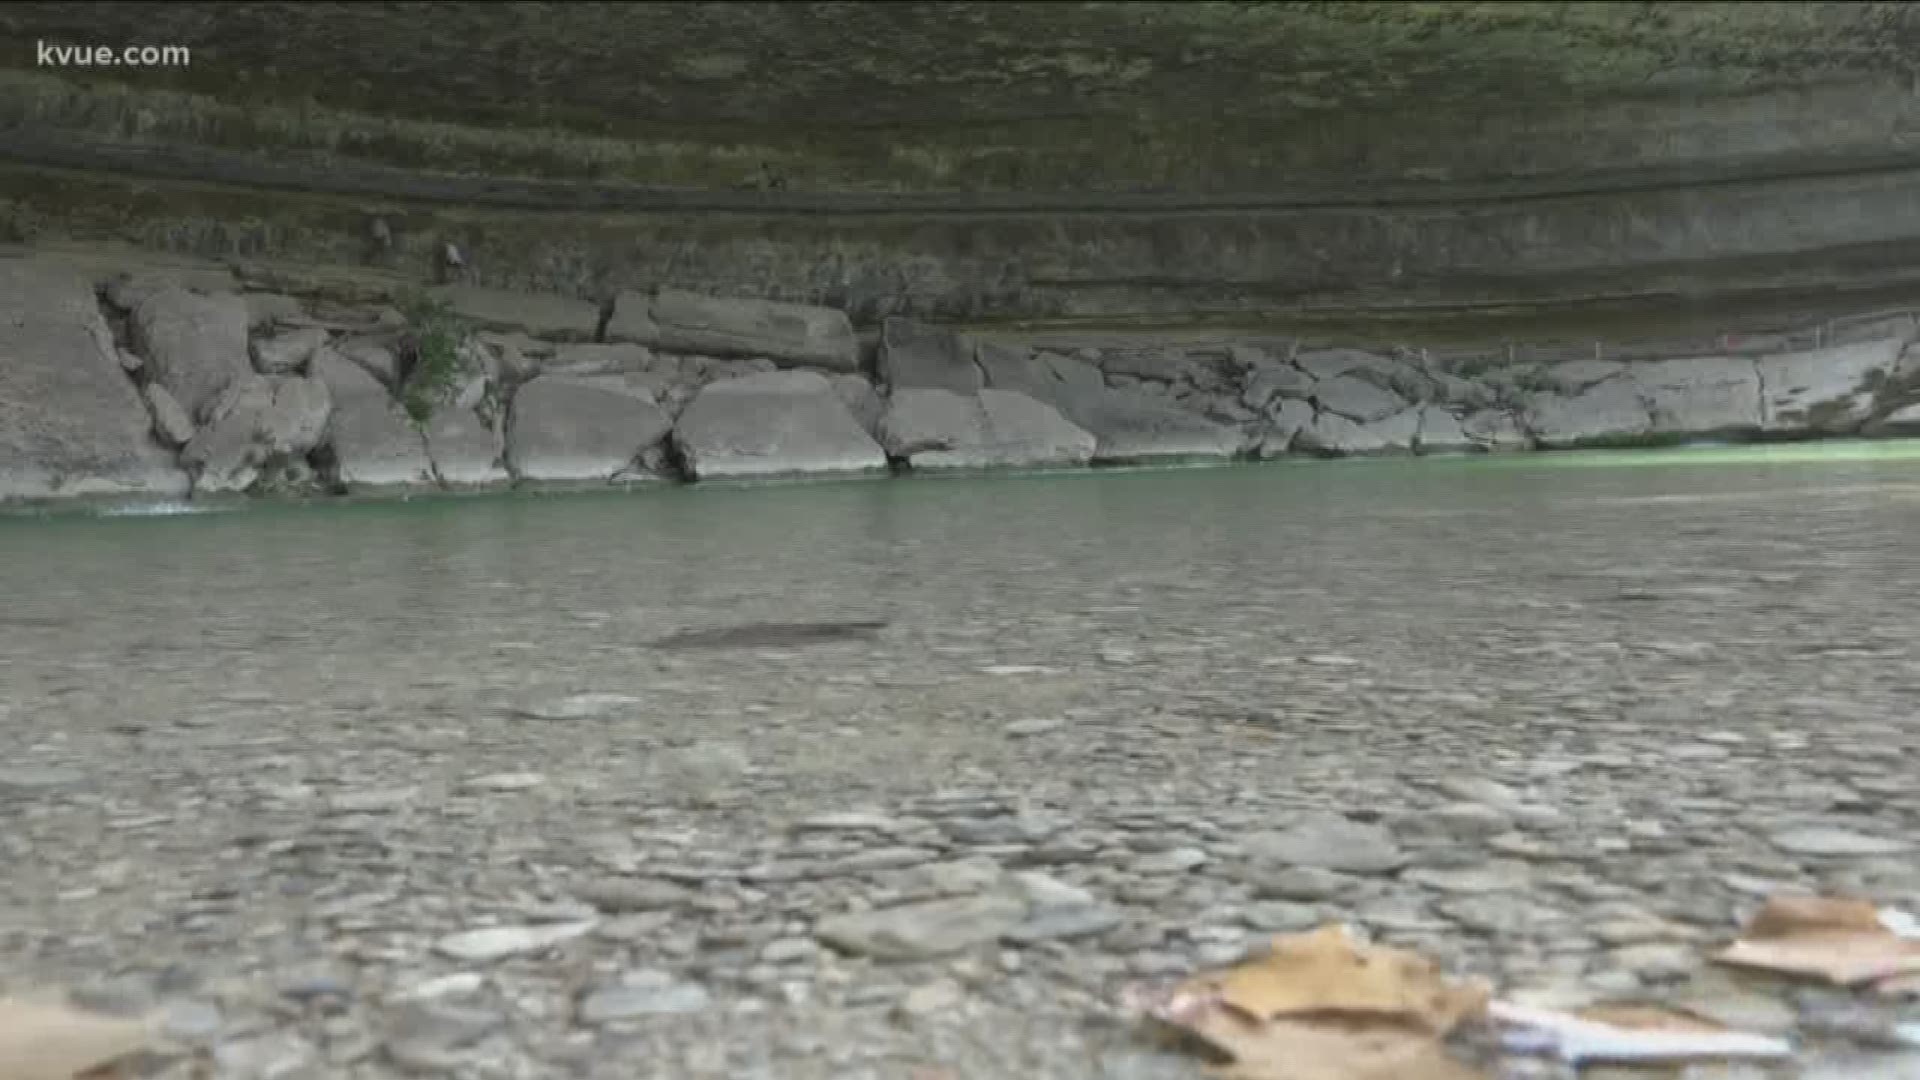 Despite a very unproductive meeting with developers, homeowners are vowing to continue their fight to protect Hamilton Pool.